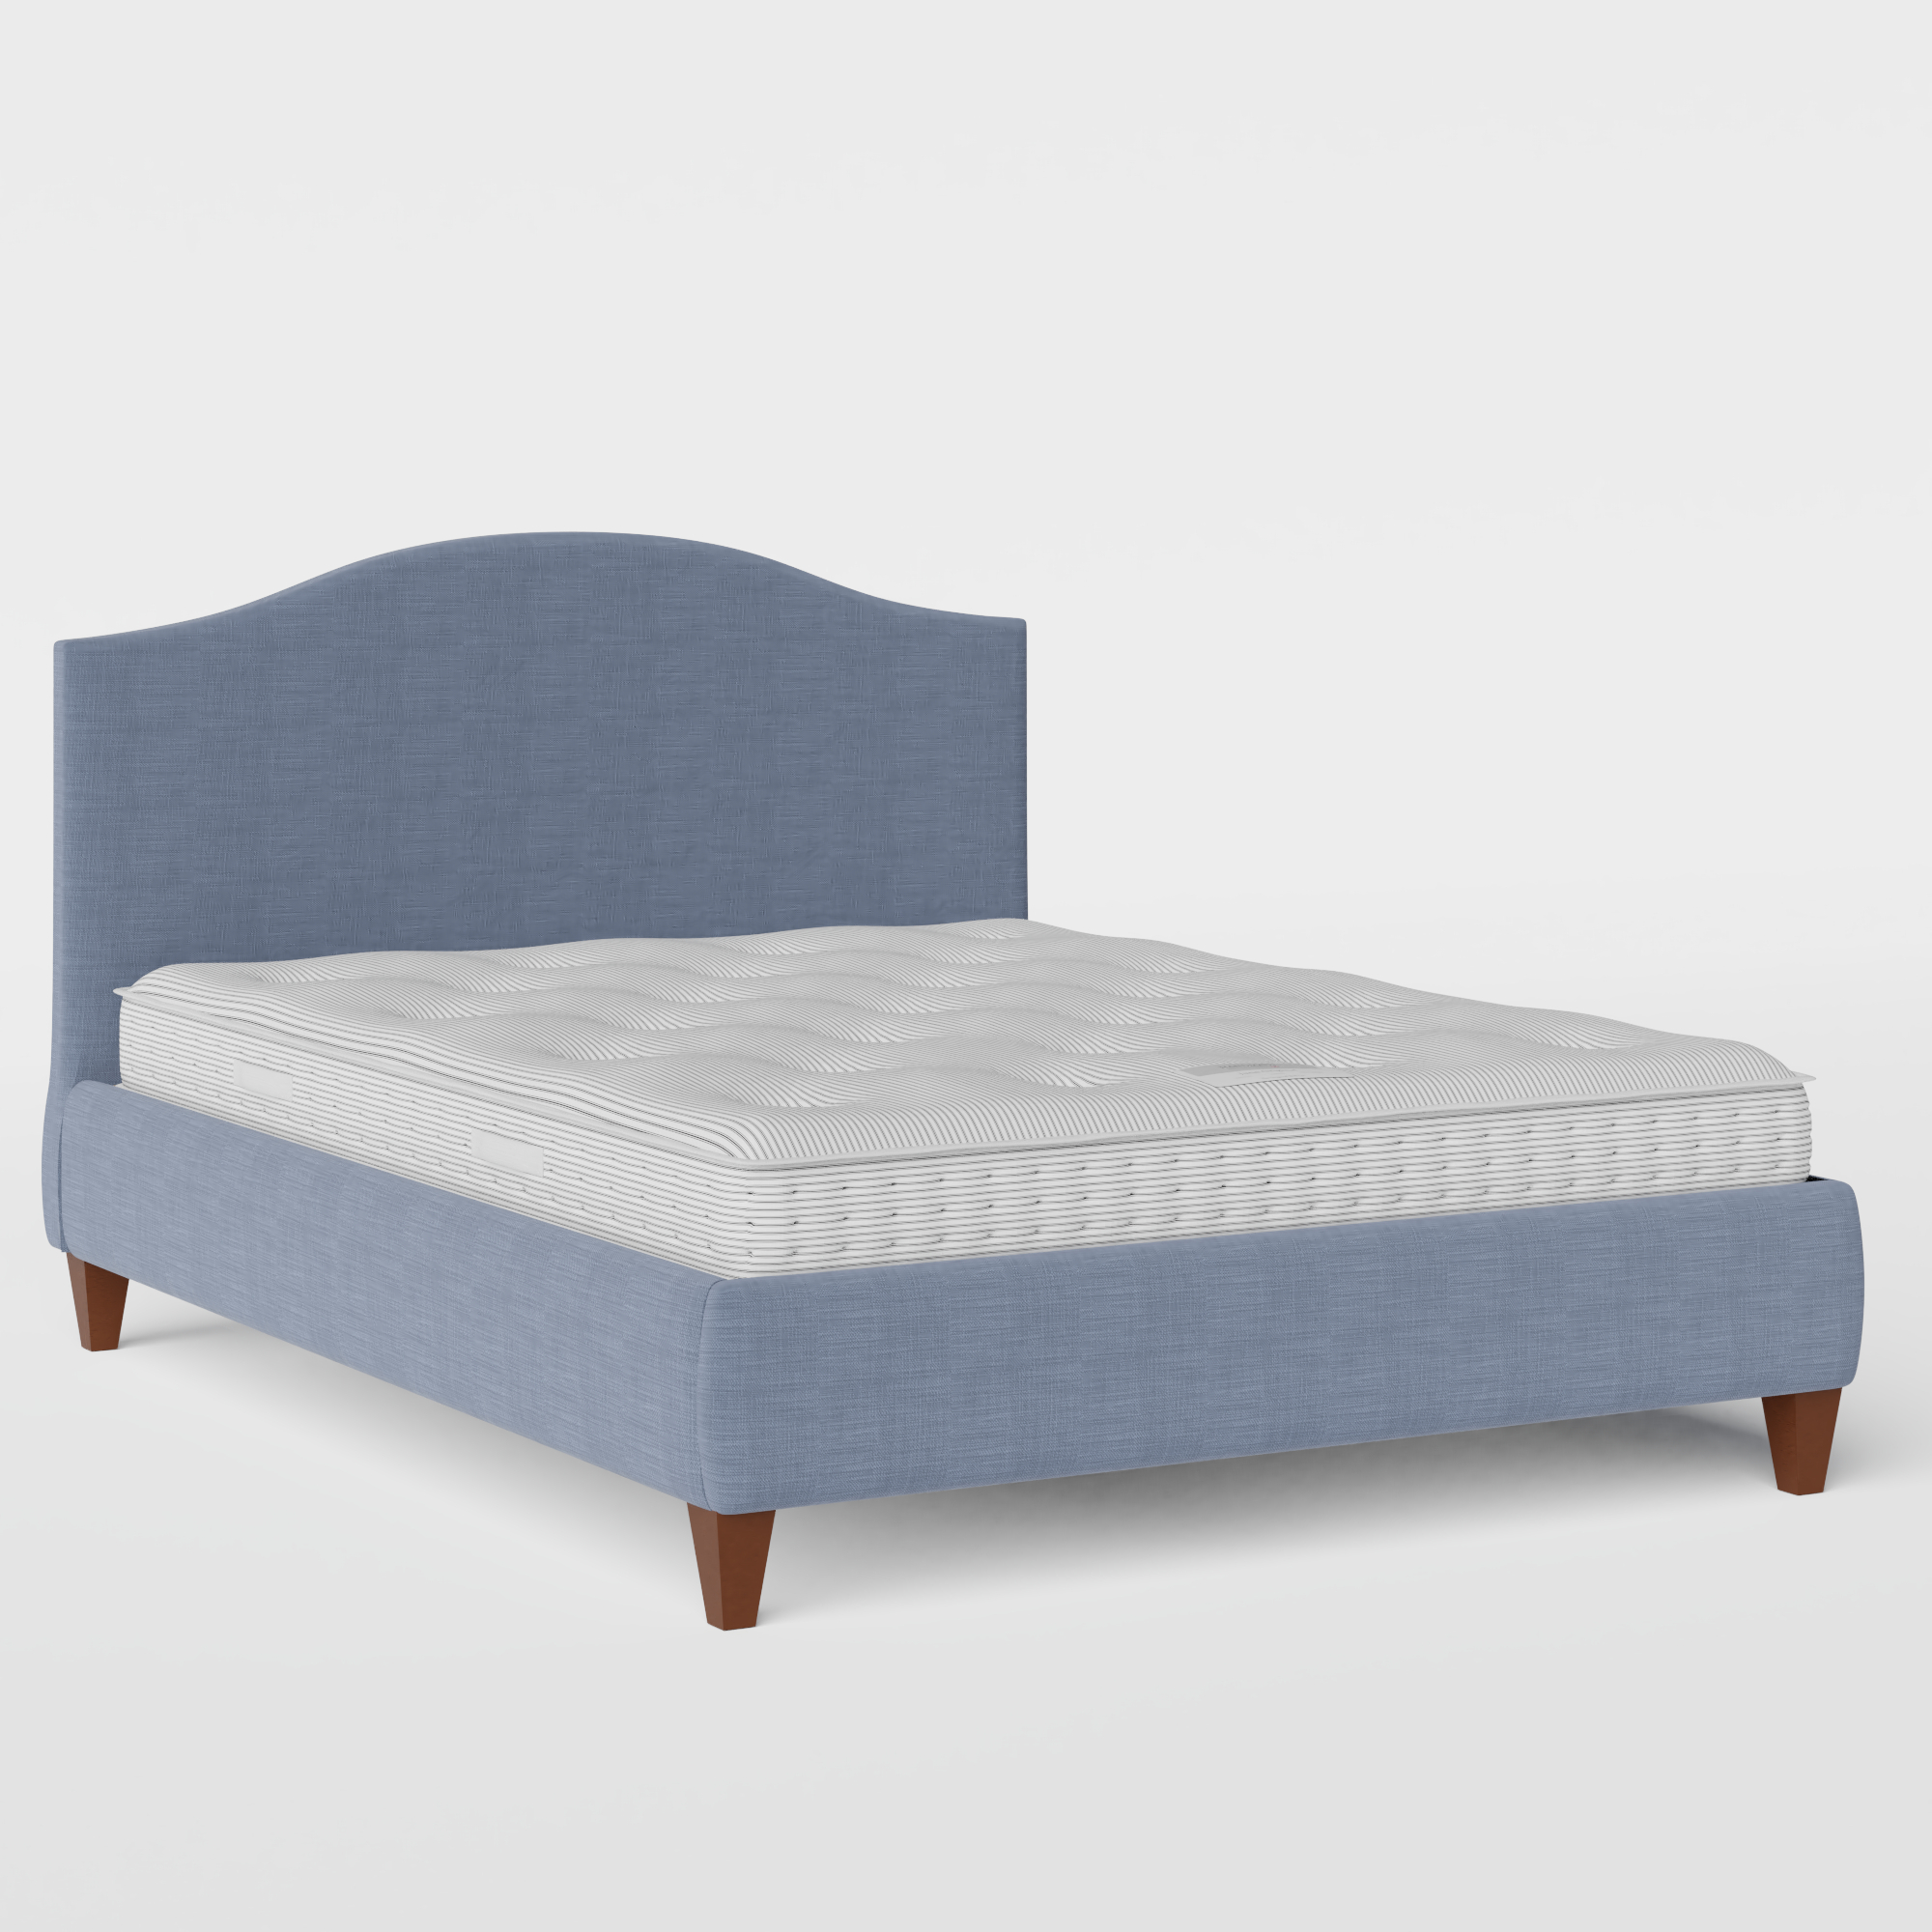 Daniella upholstered bed in blue fabric